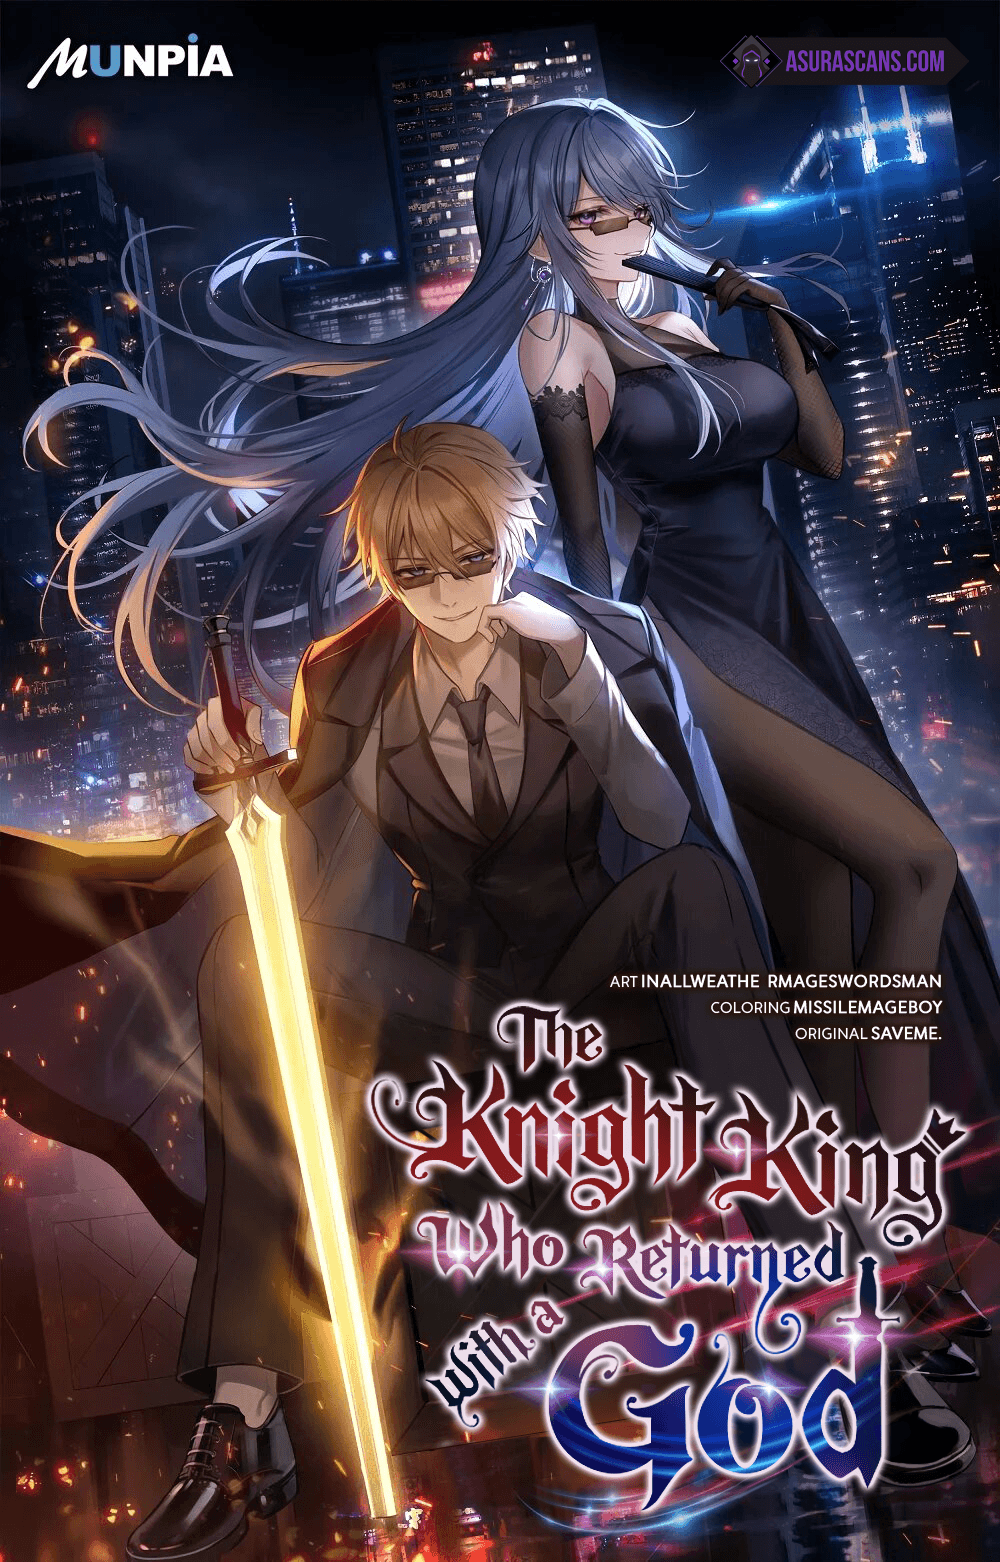 The Knight King Who Returned with a God cover image